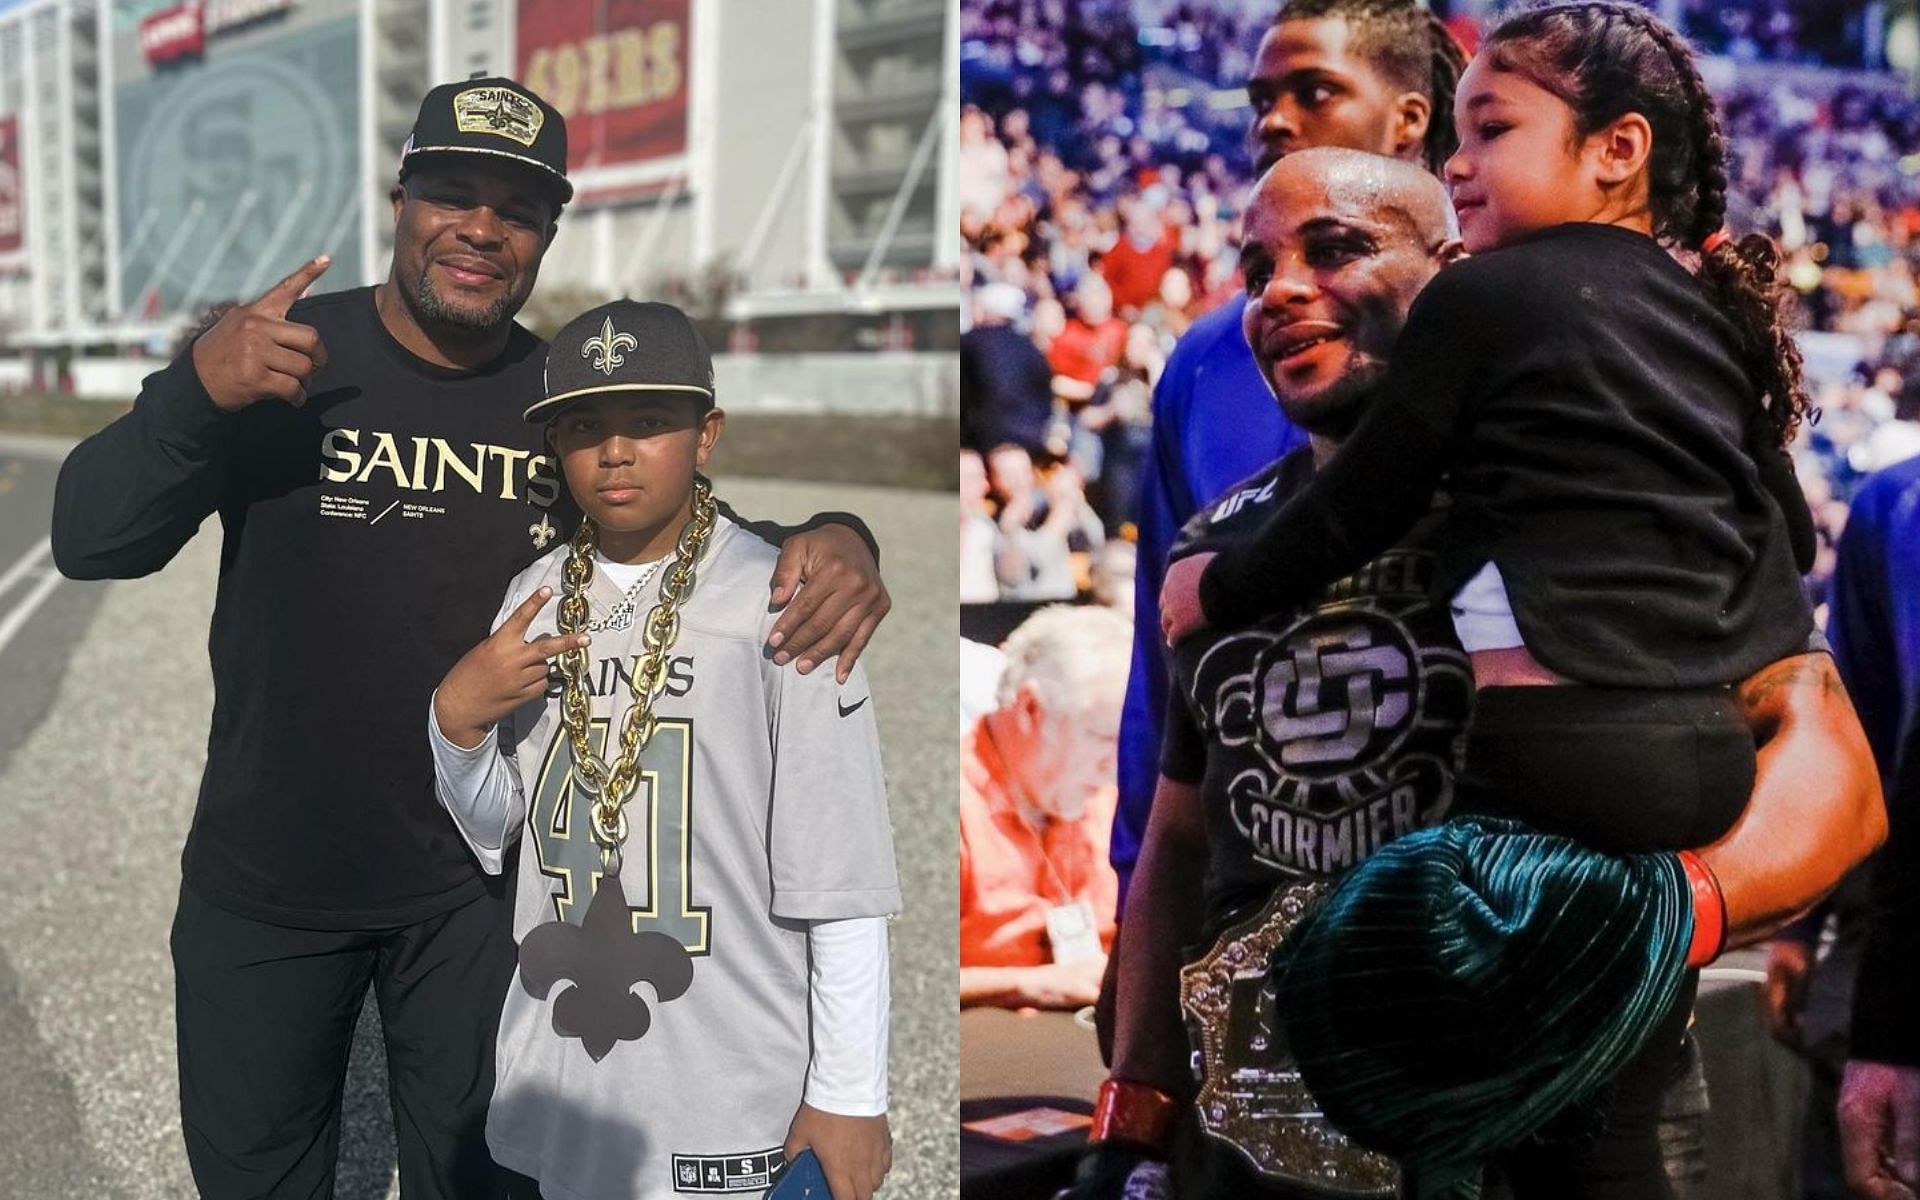 UFC Hall of Famer Daniel Cormier with his kids